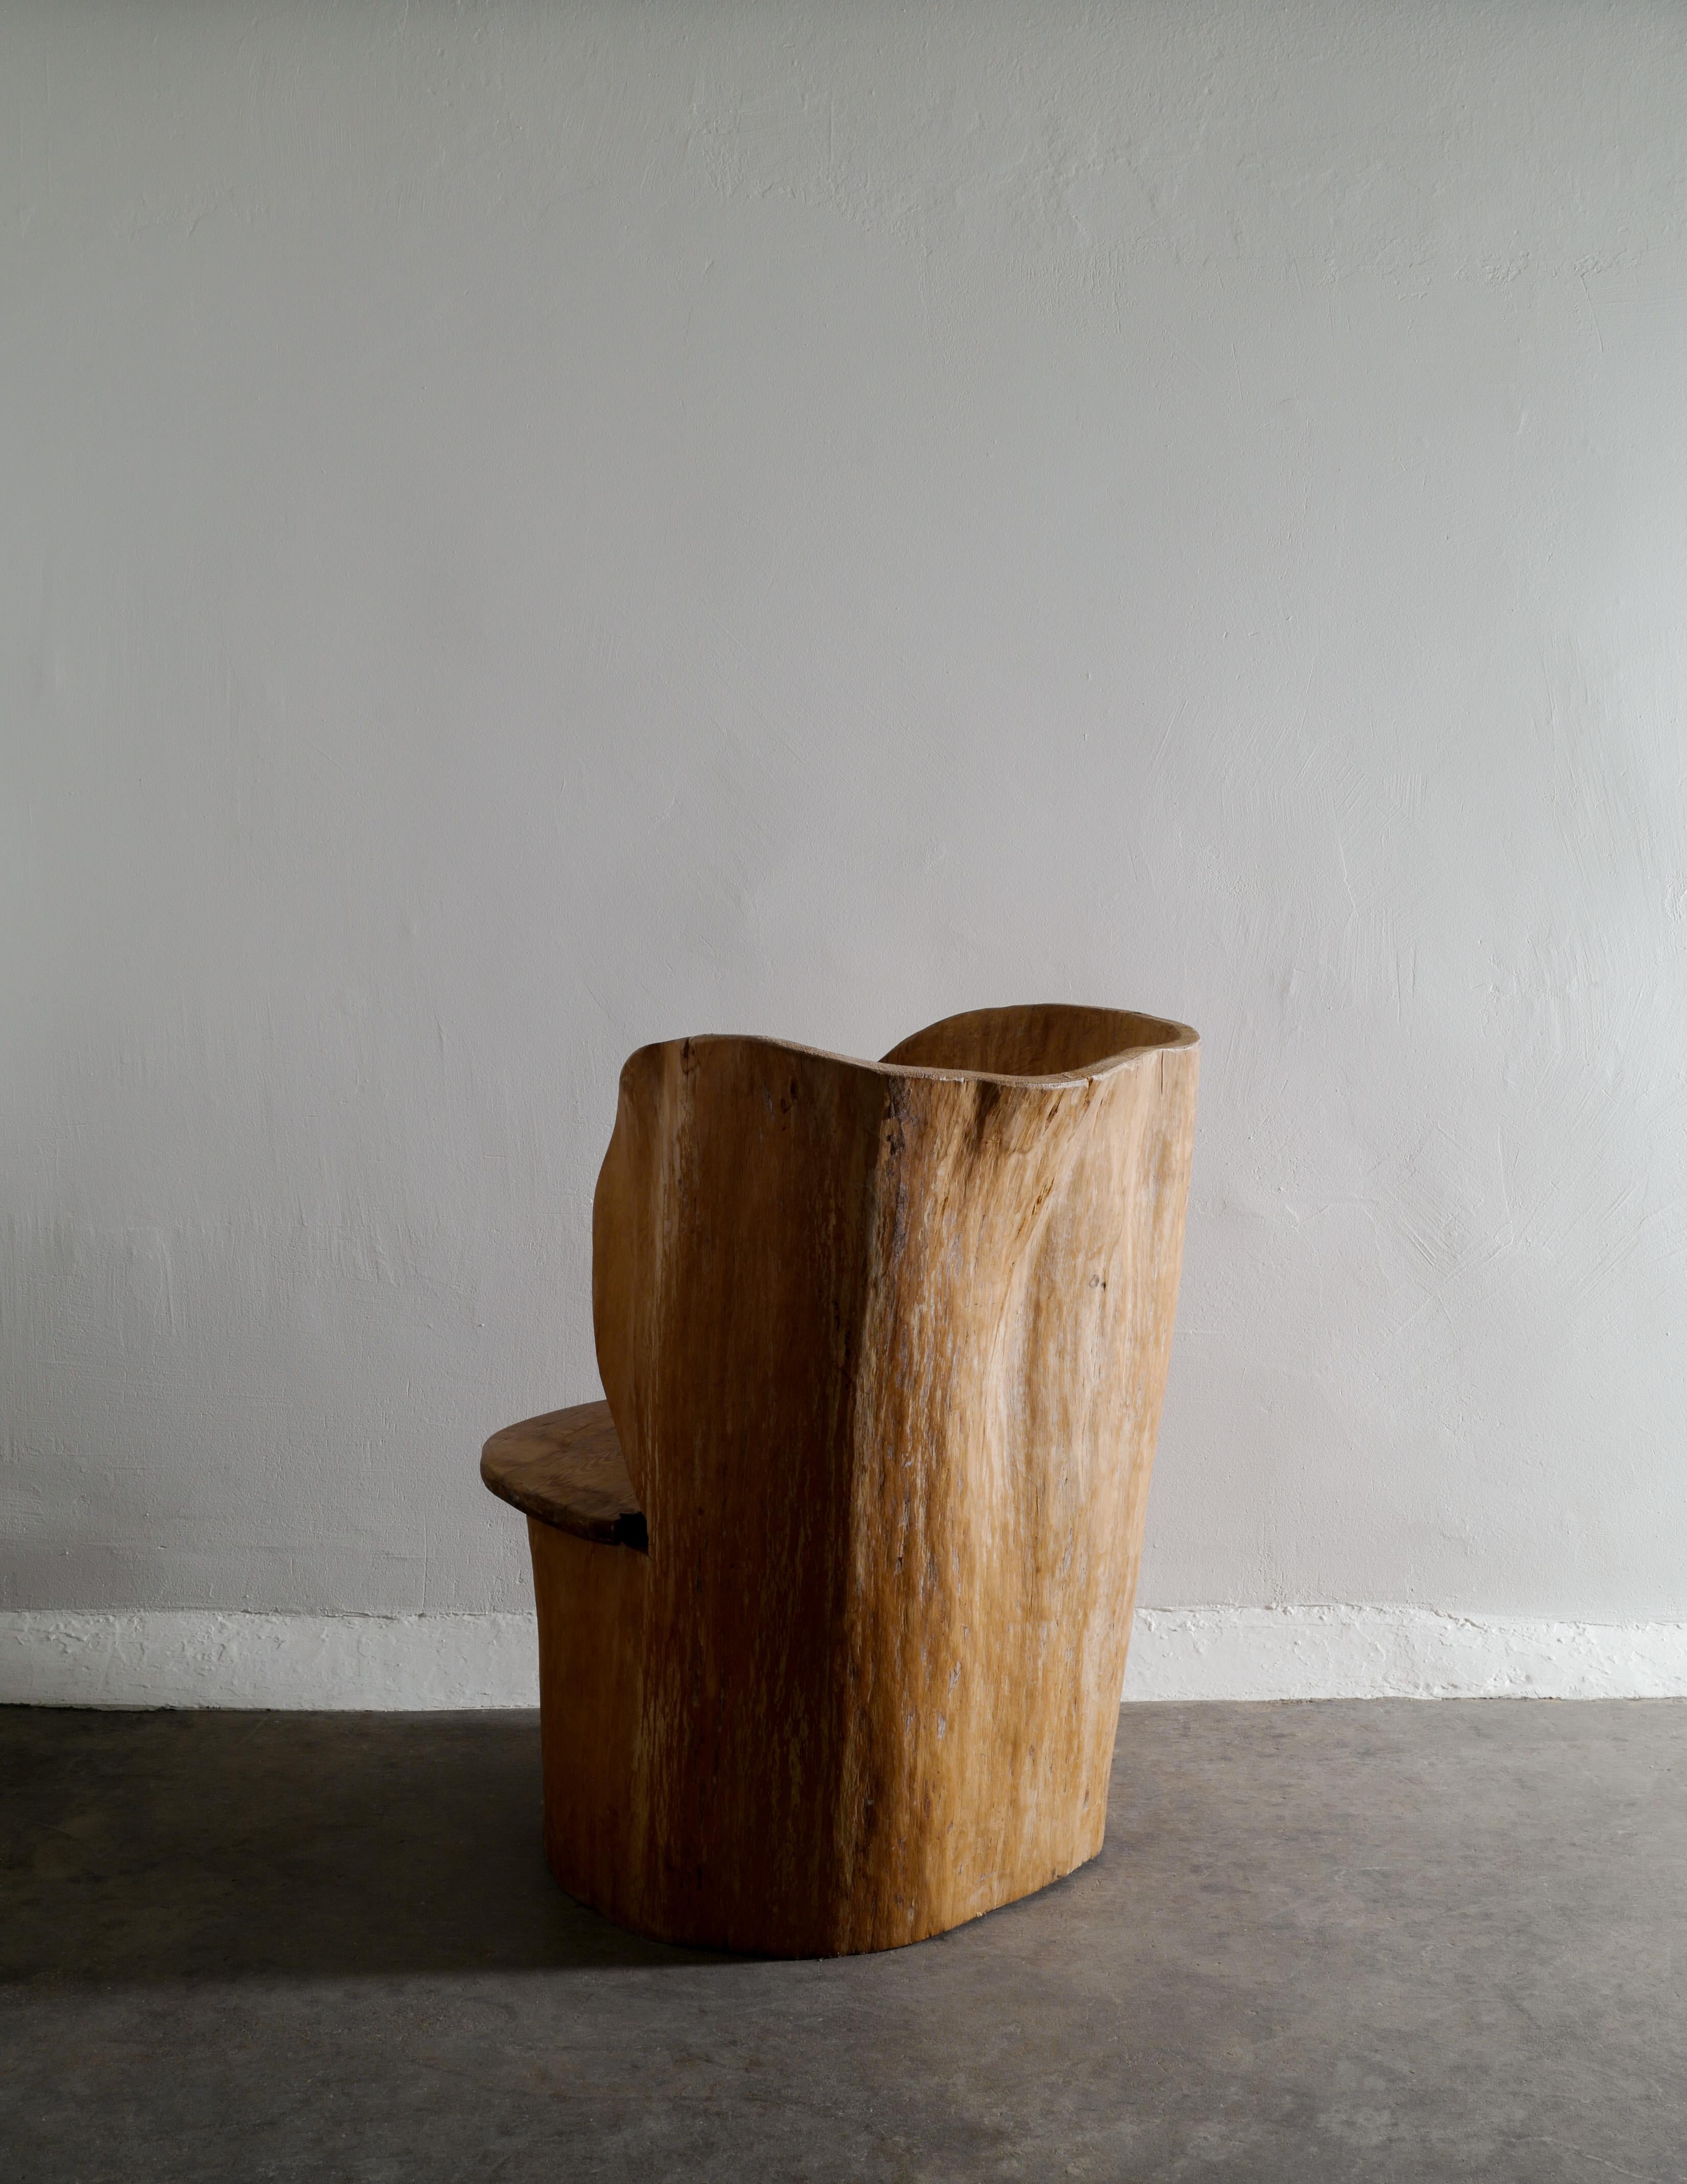 Rare and oversized stump chair in a brutalist and wabi sabi style produced in Sweden during the 1950s. In good vintage and original condition with small signs and patina from age and use. 

Dimensions: H: 88 cm W: 78 cm D: 77 cm SH: 45 cm.